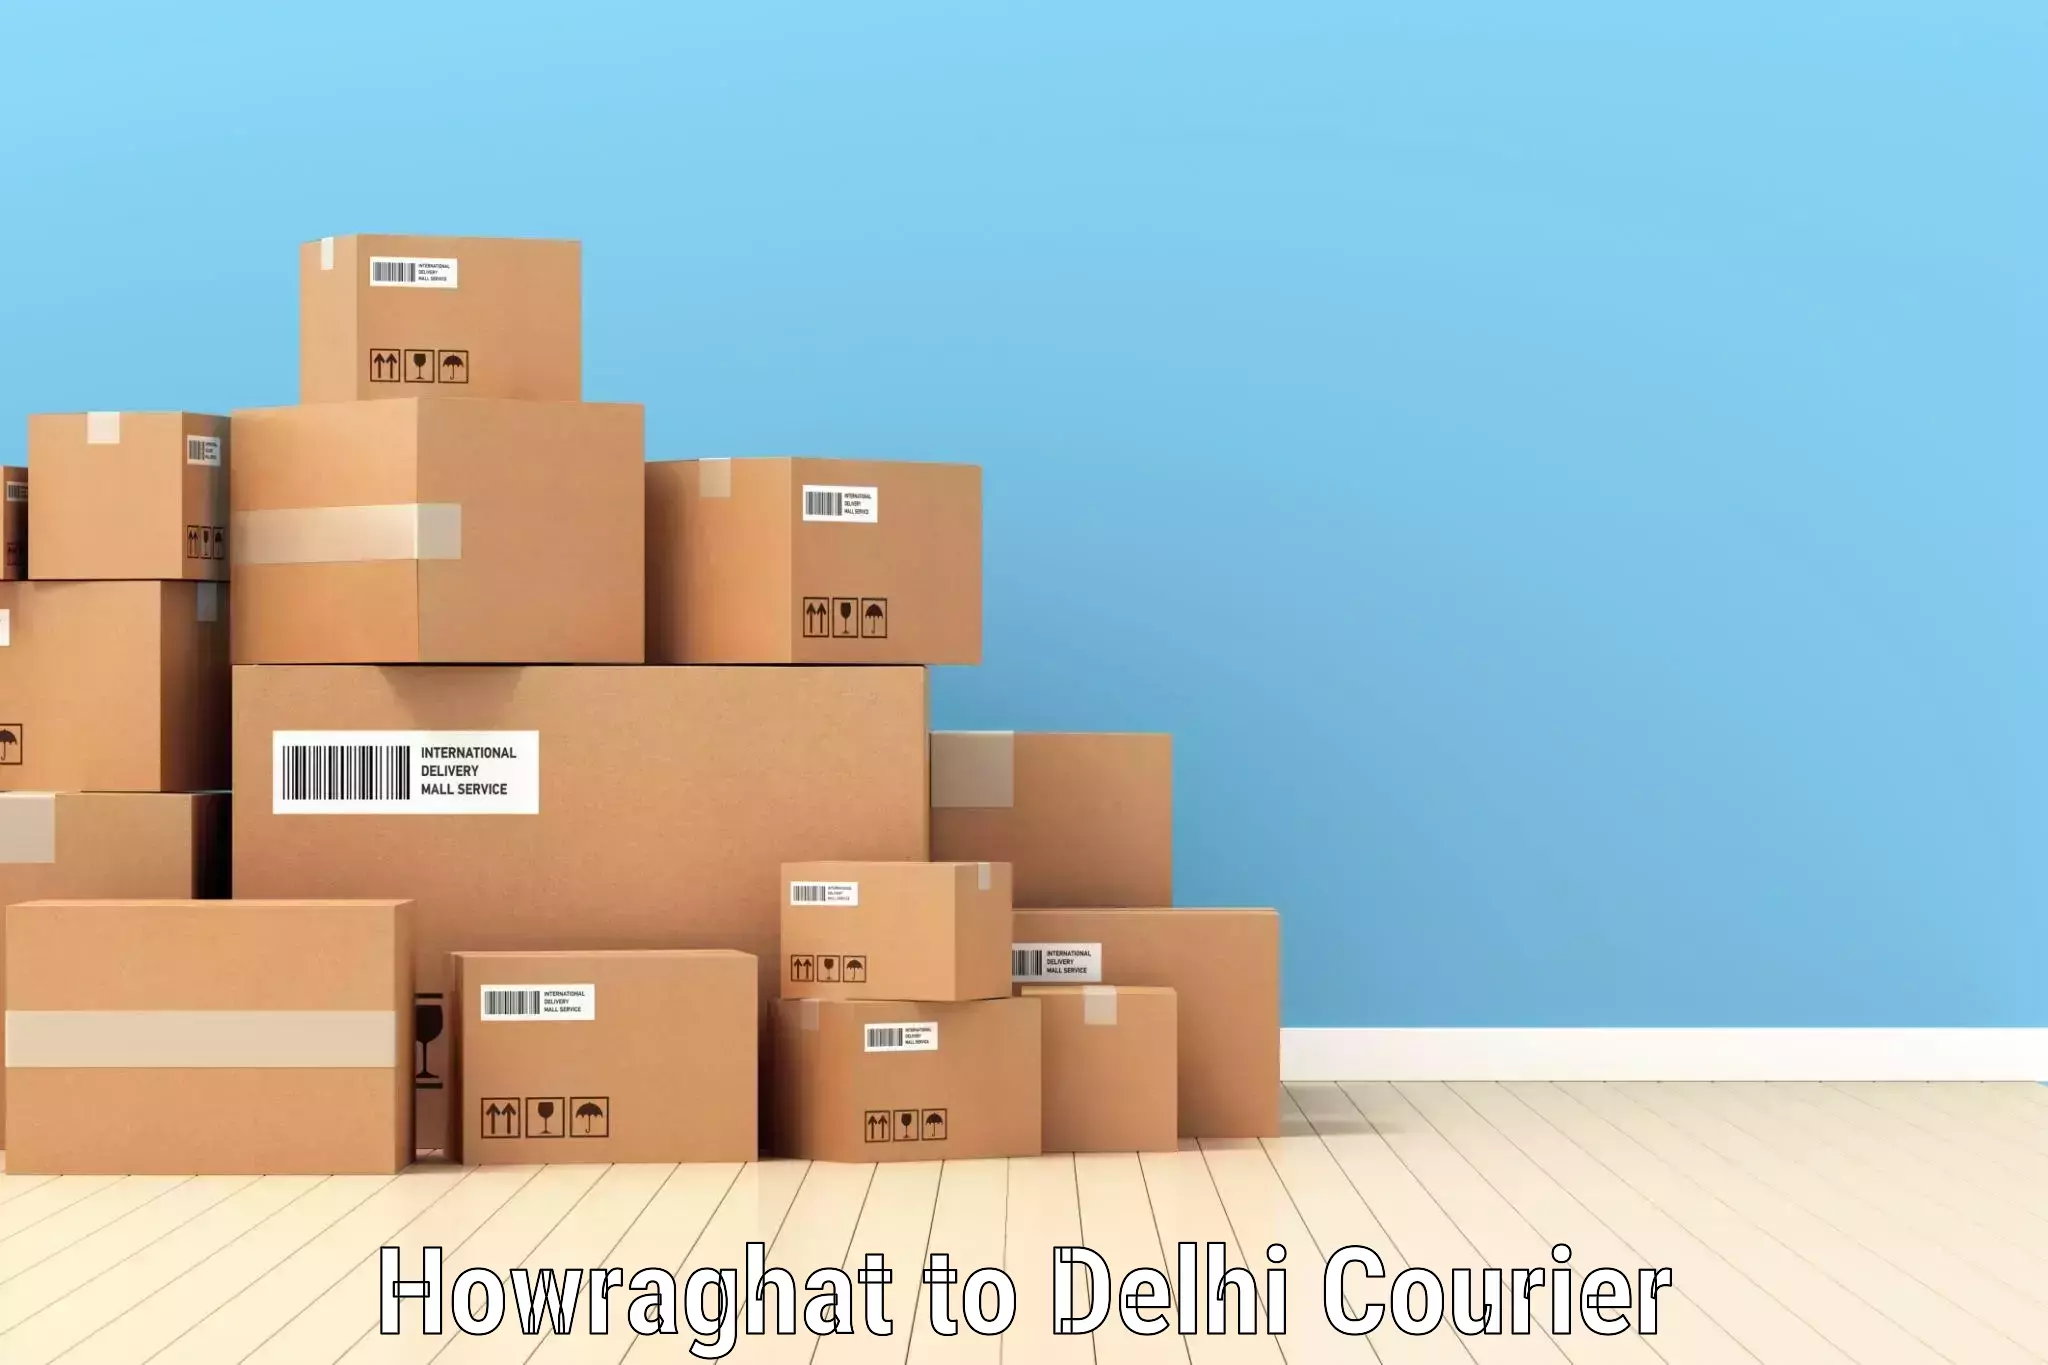 Affordable logistics services Howraghat to NCR